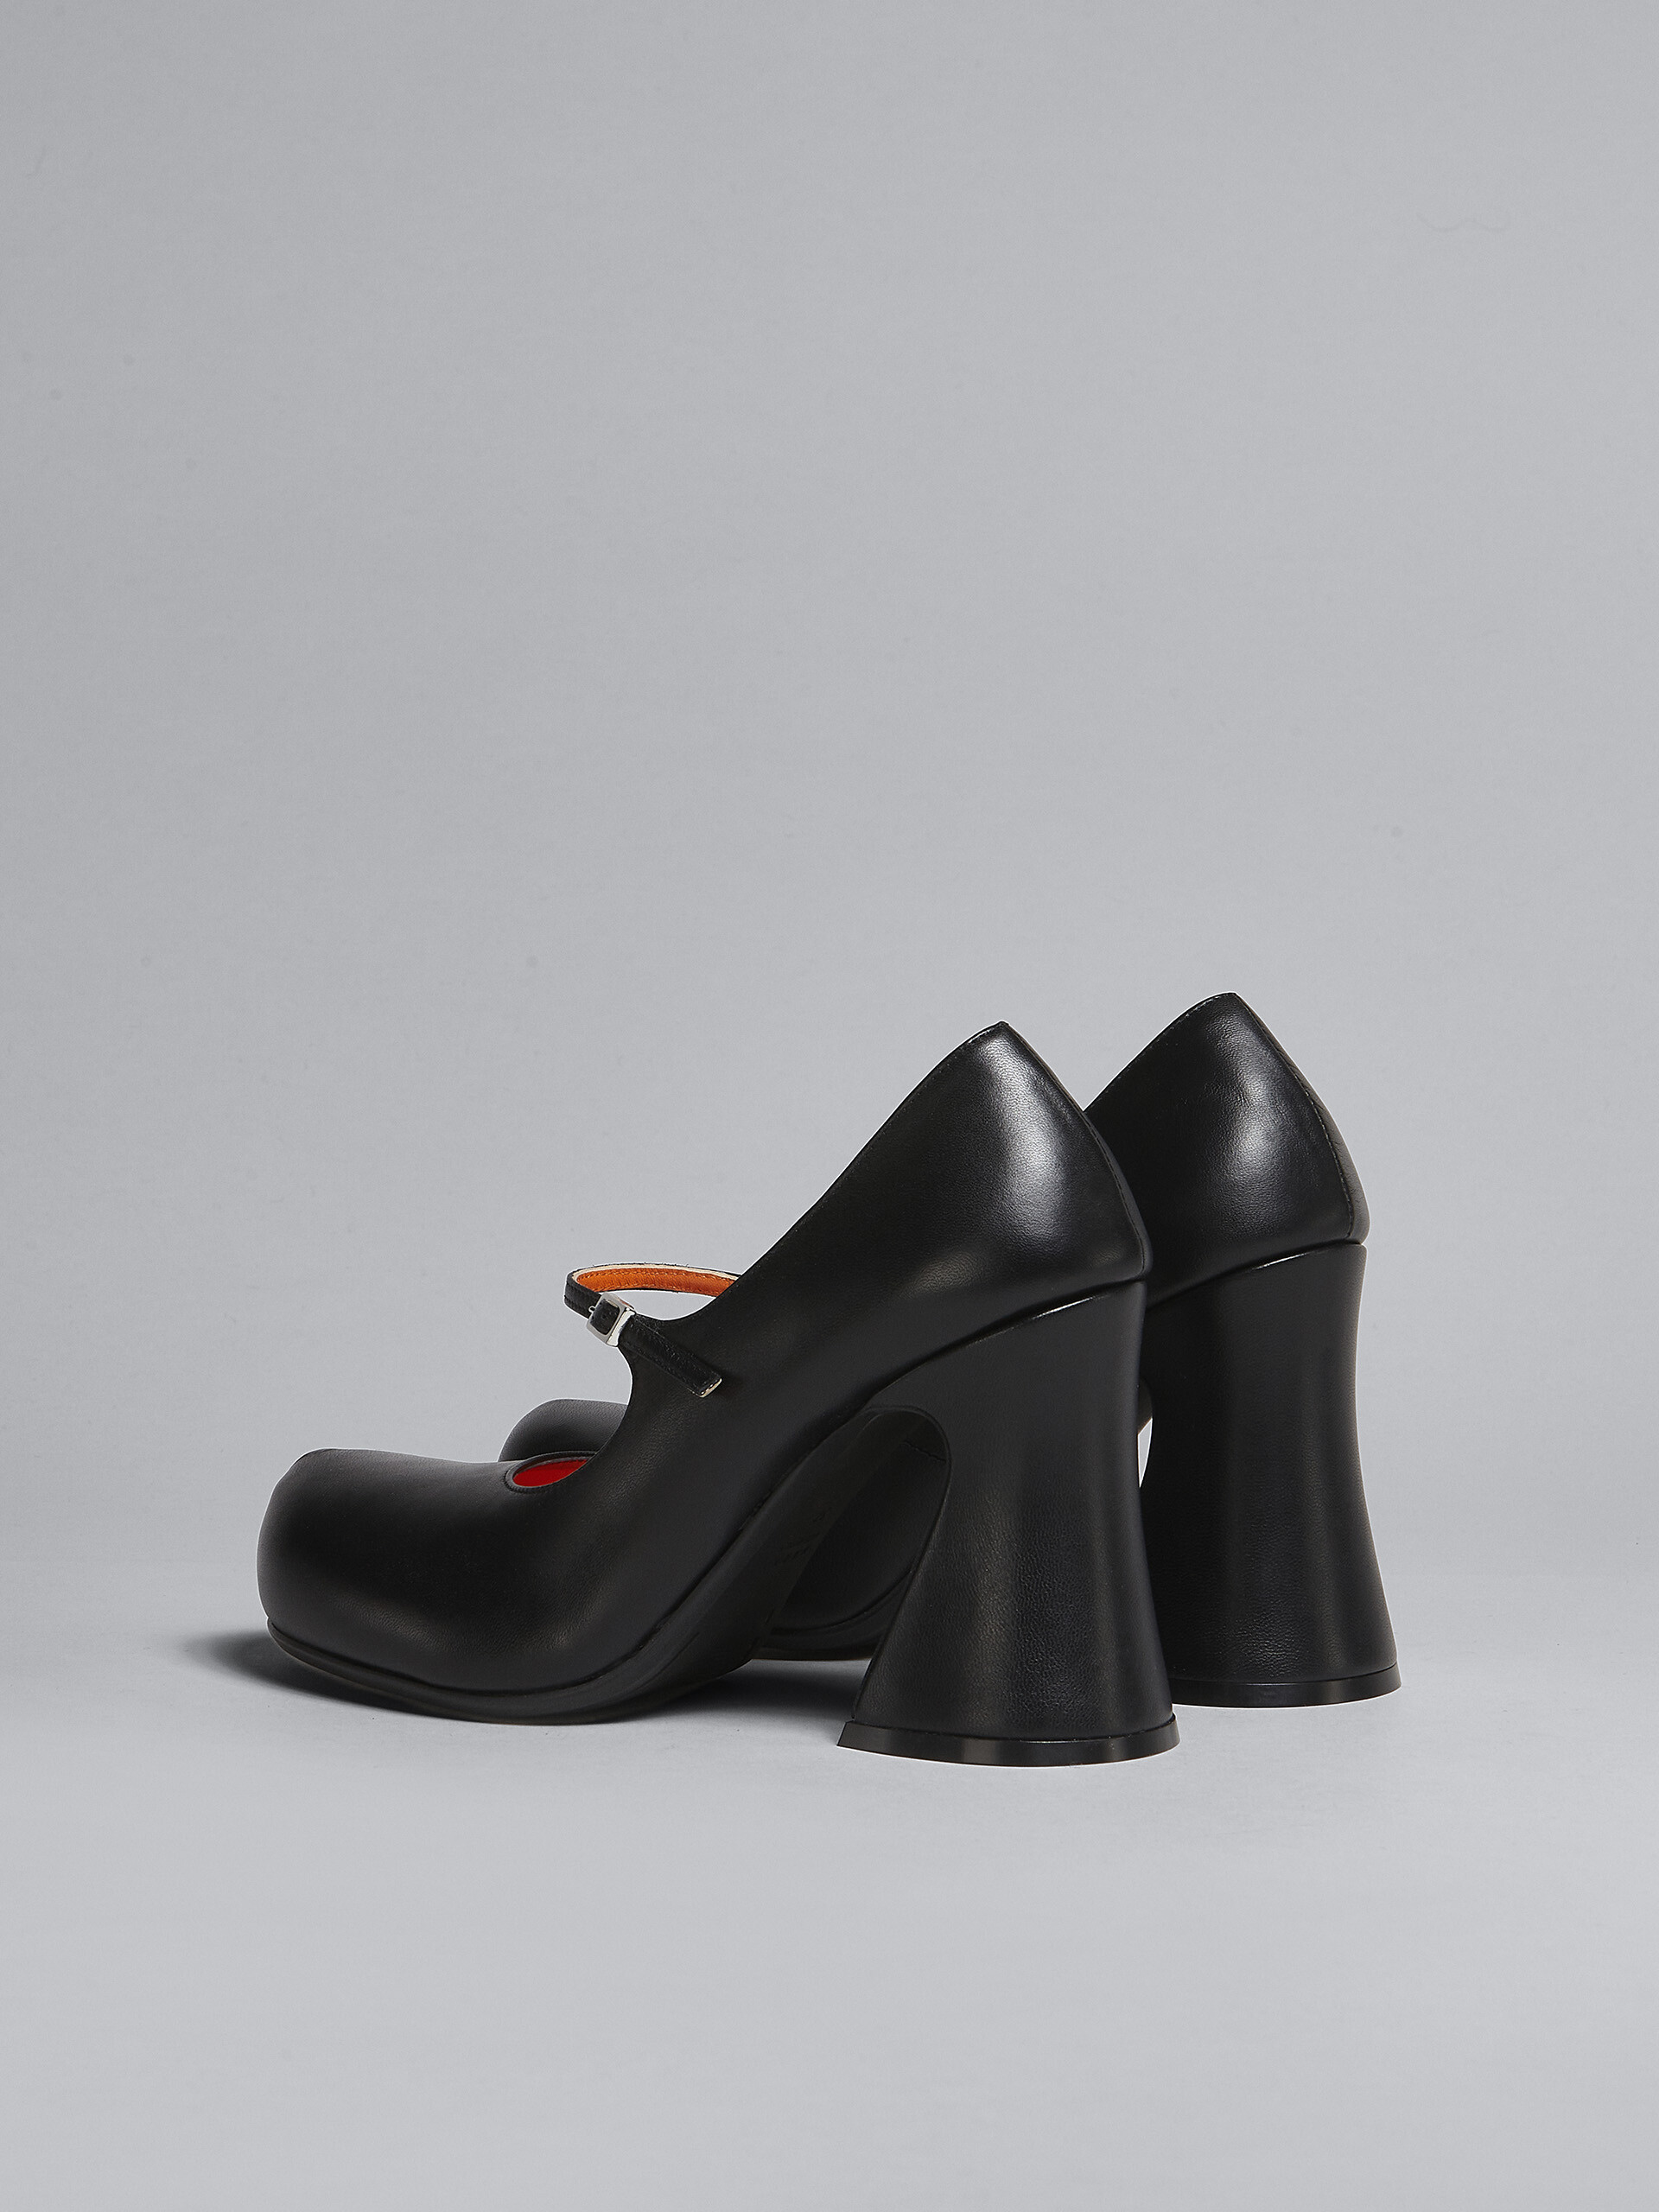 Black leather Mary Jane pump - Sneakers - Image 3